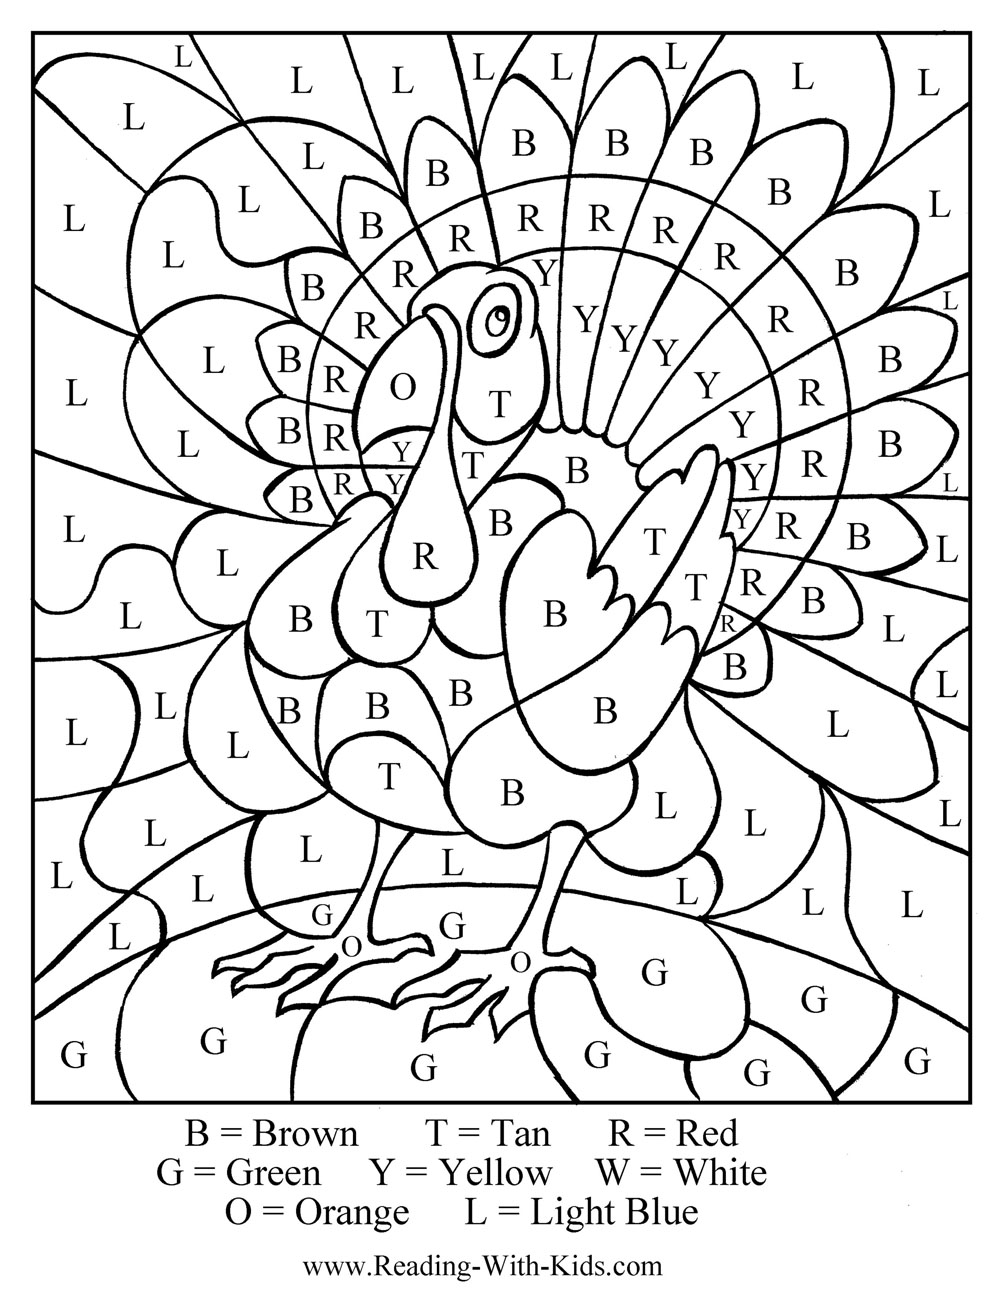 turkeys to color free printable turkey coloring pages for kids turkeys to color 